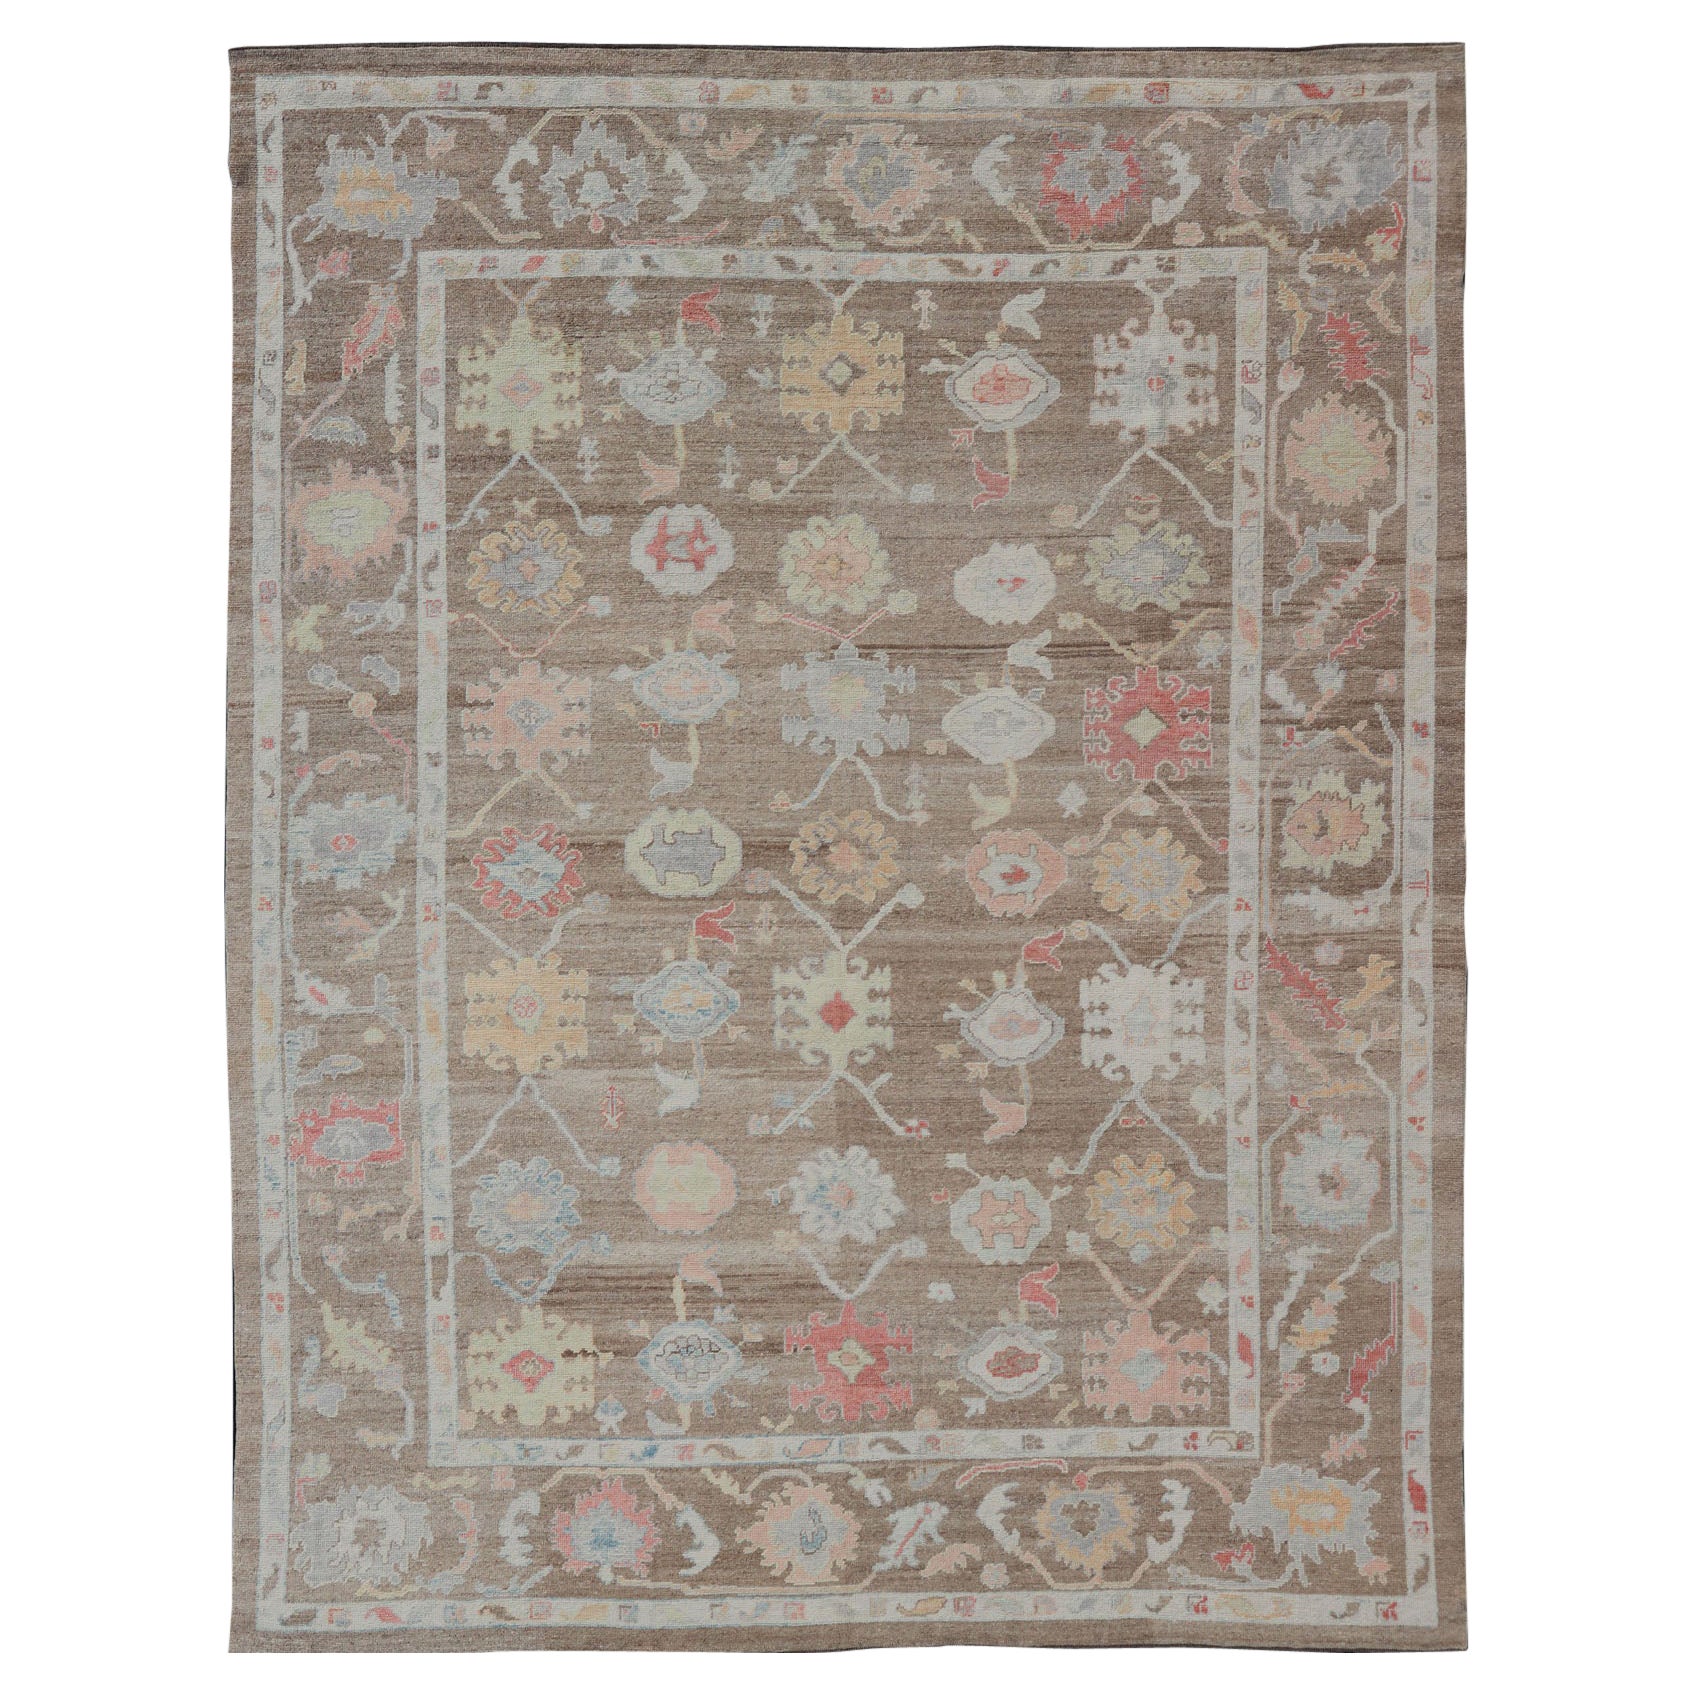 Turkish Oushak Rug with All-Over Floral Design on a Light Brown Field 